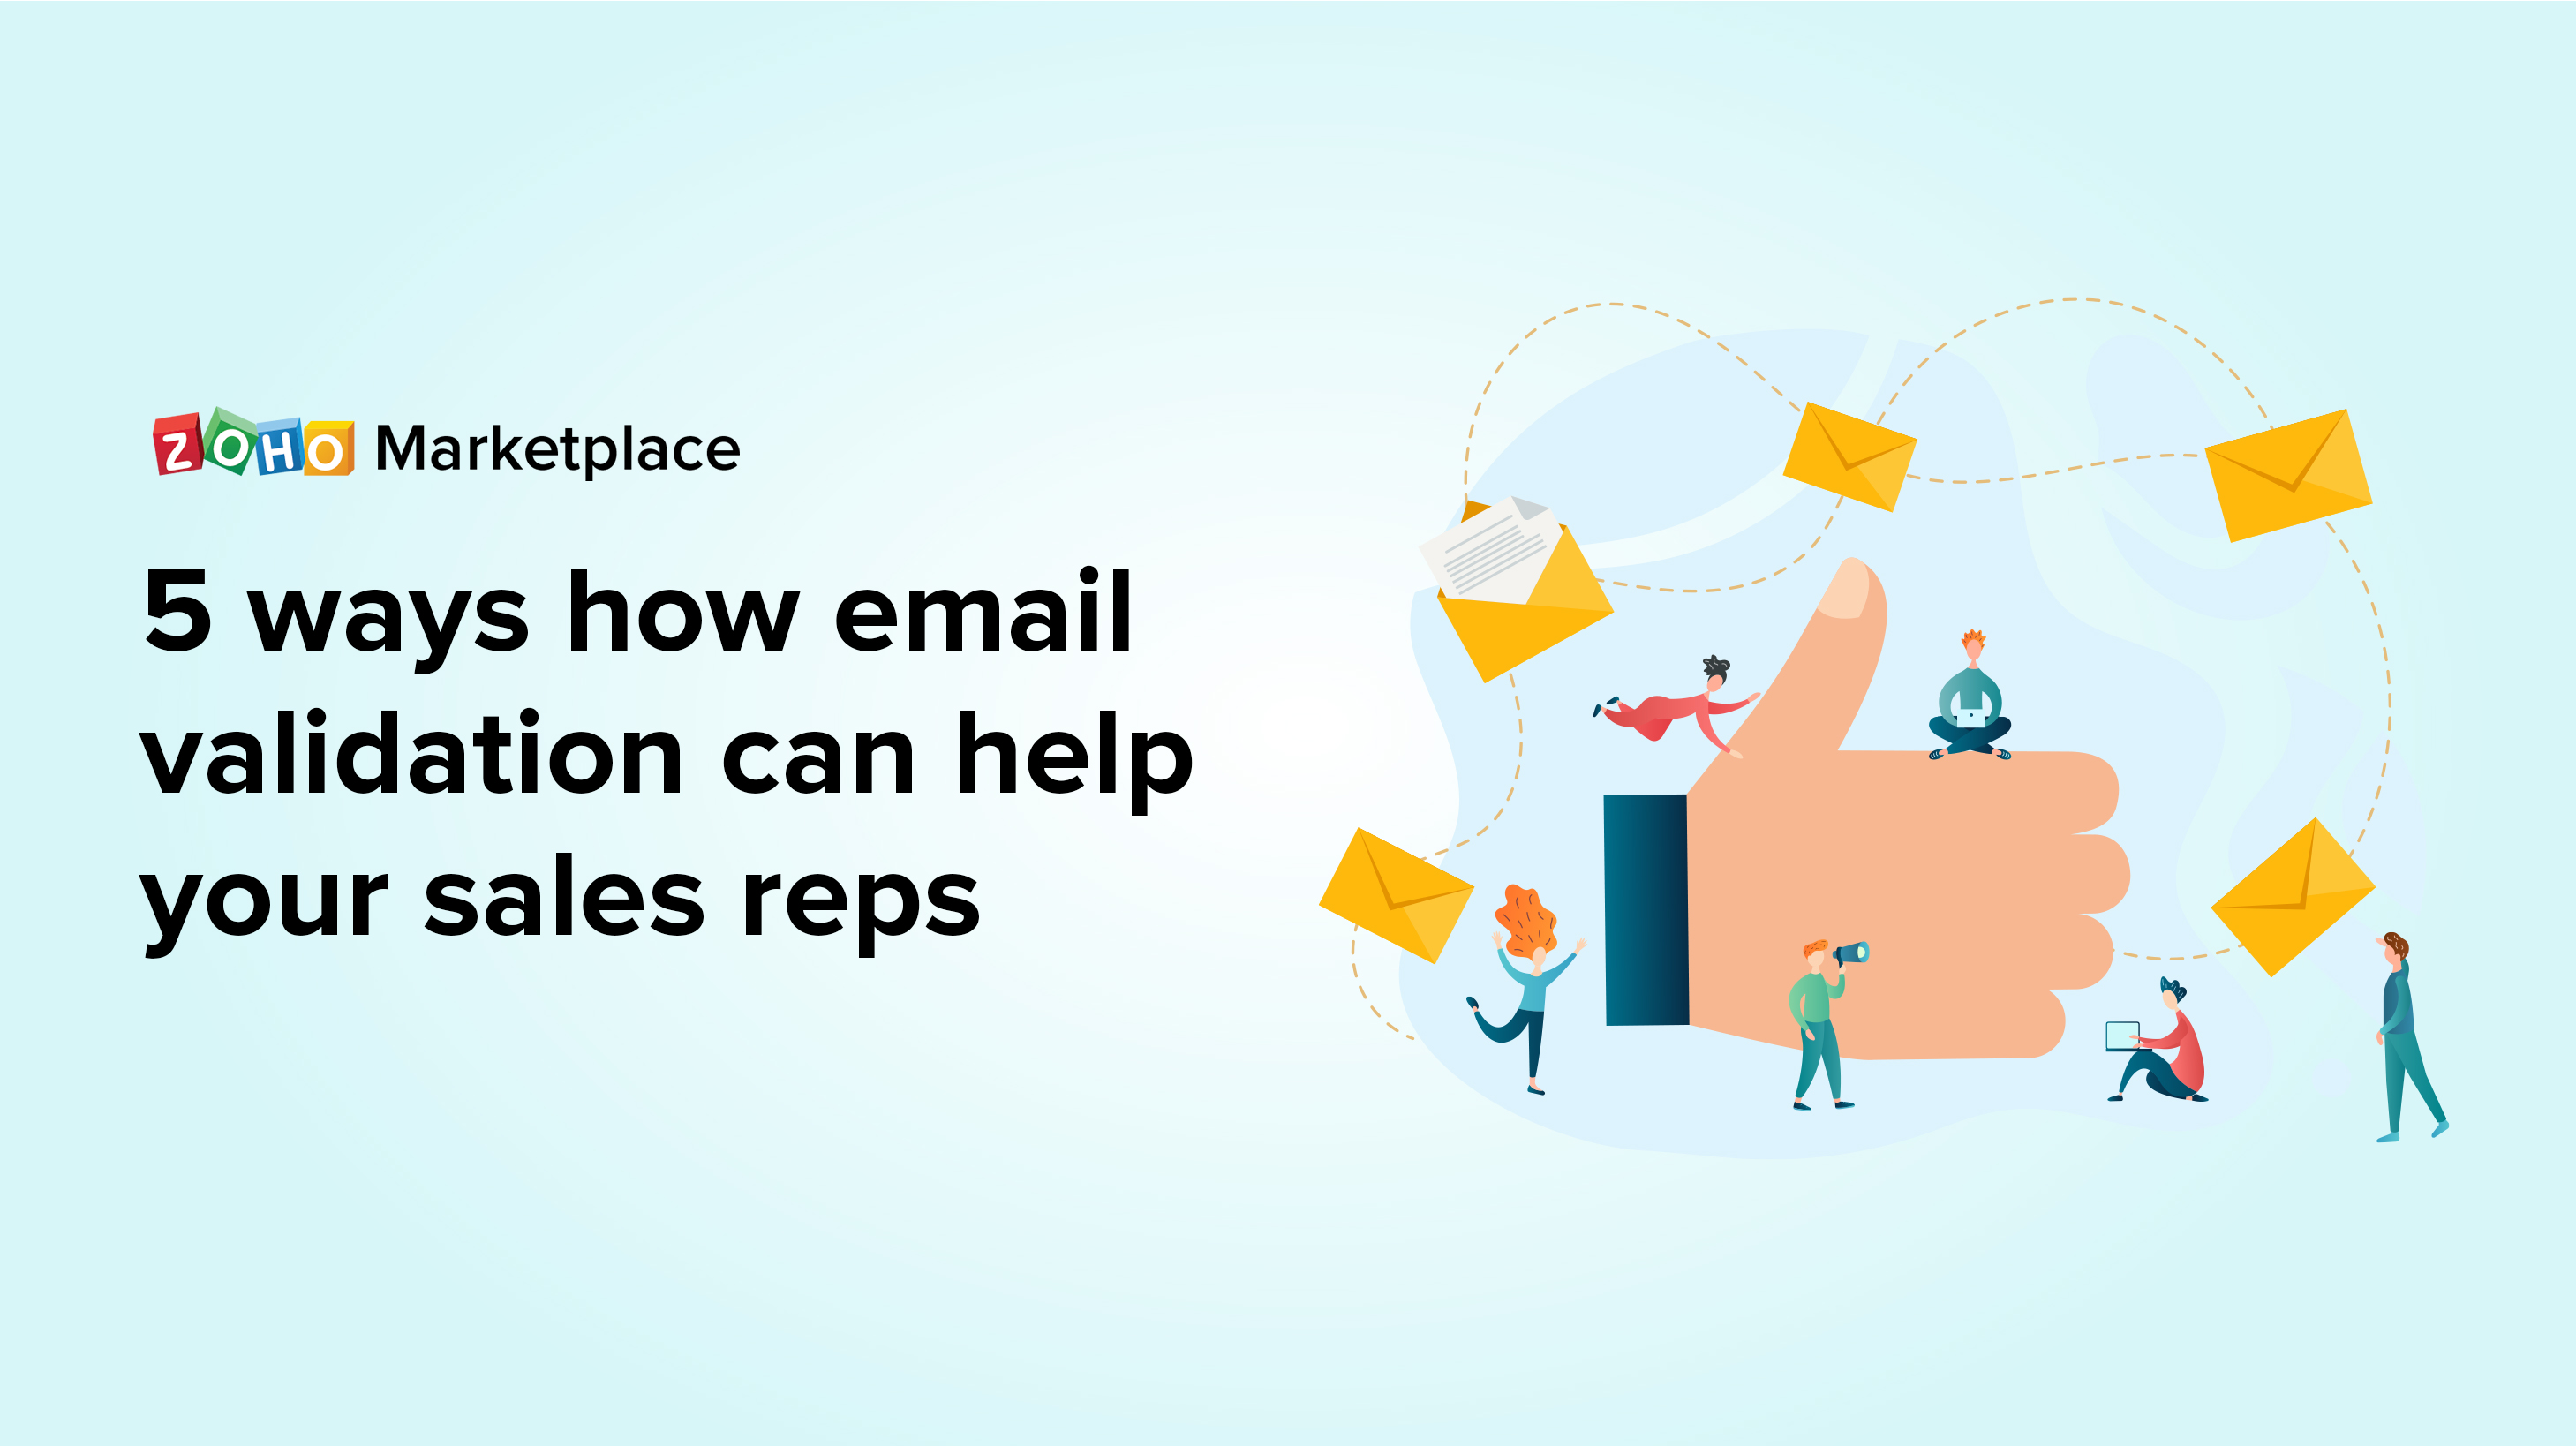 5 ways how email validation can help your sales reps